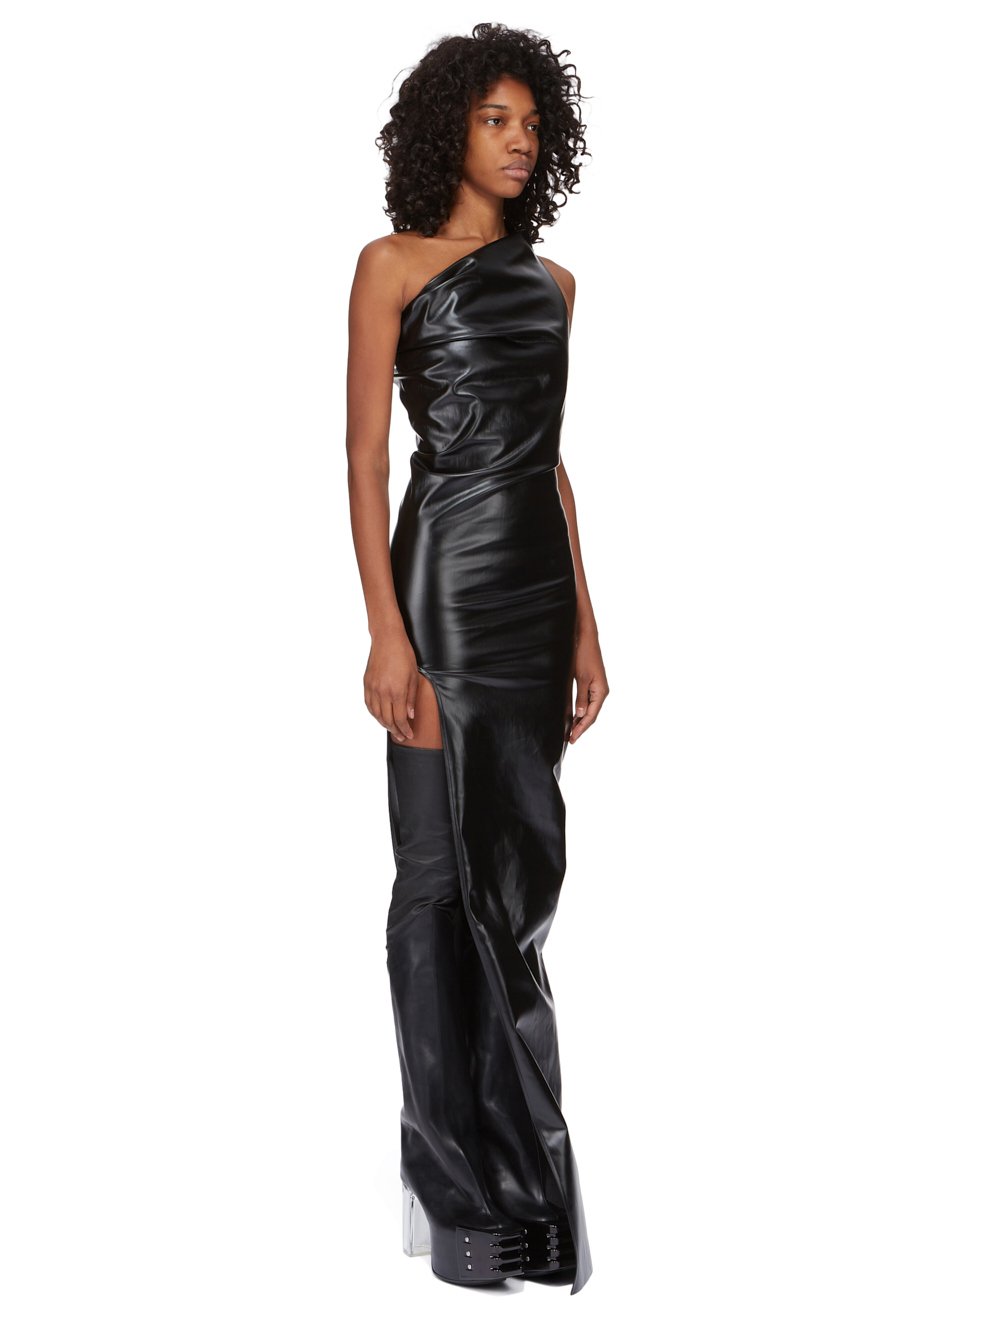 RICK OWENS FW23 LUXOR ATHENA GOWN IN BLACK RUBBER COVERED STRETCH DENIM